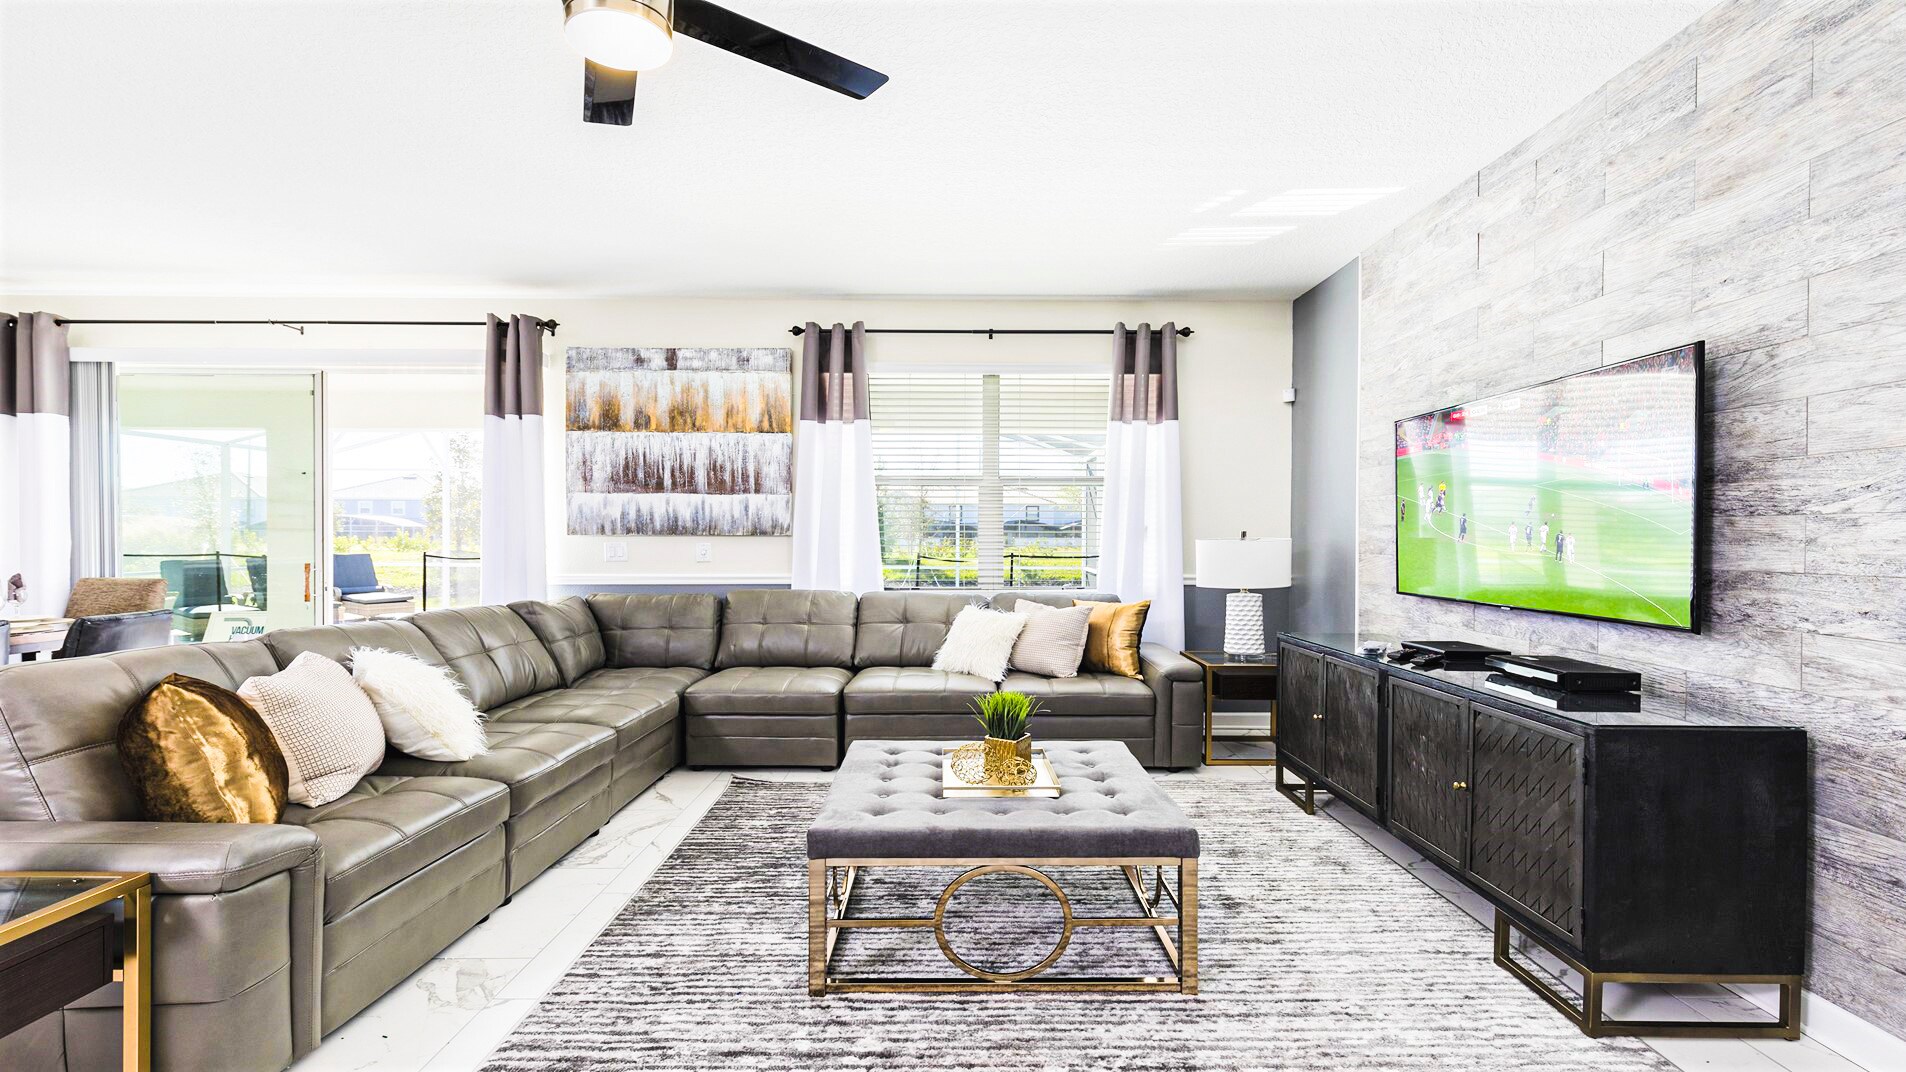 Generously sized living room featuring a cozy sofa, creating the ideal setting for a family reunion.